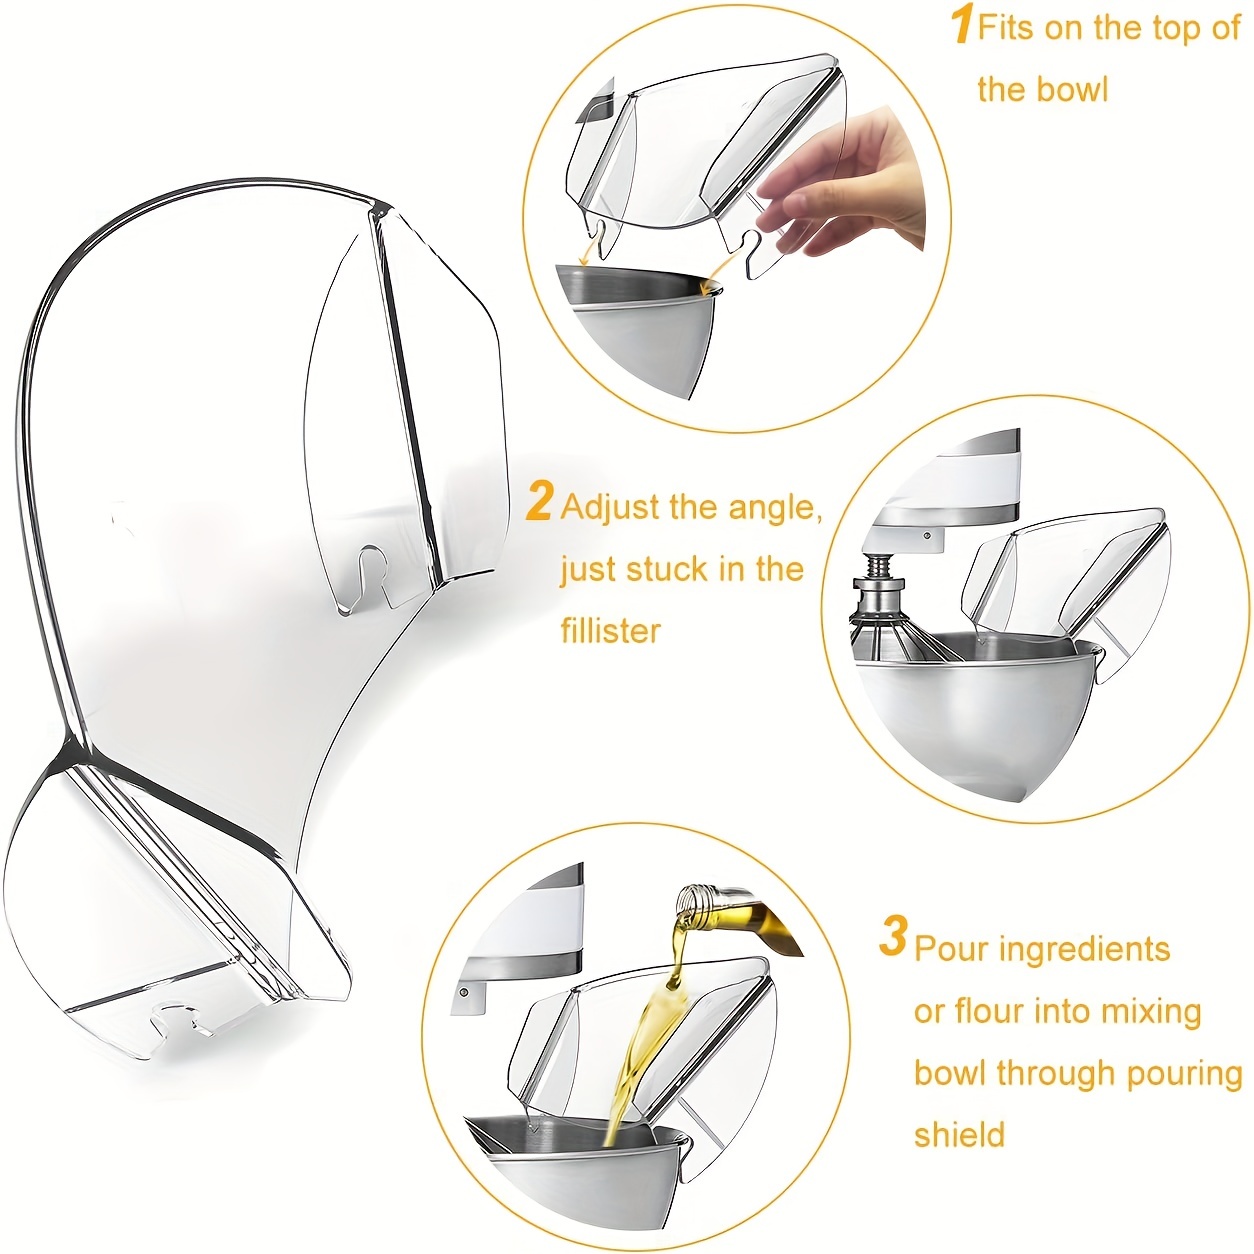  New Metro Design PC-GL Pouring Chute for Glass Bowl